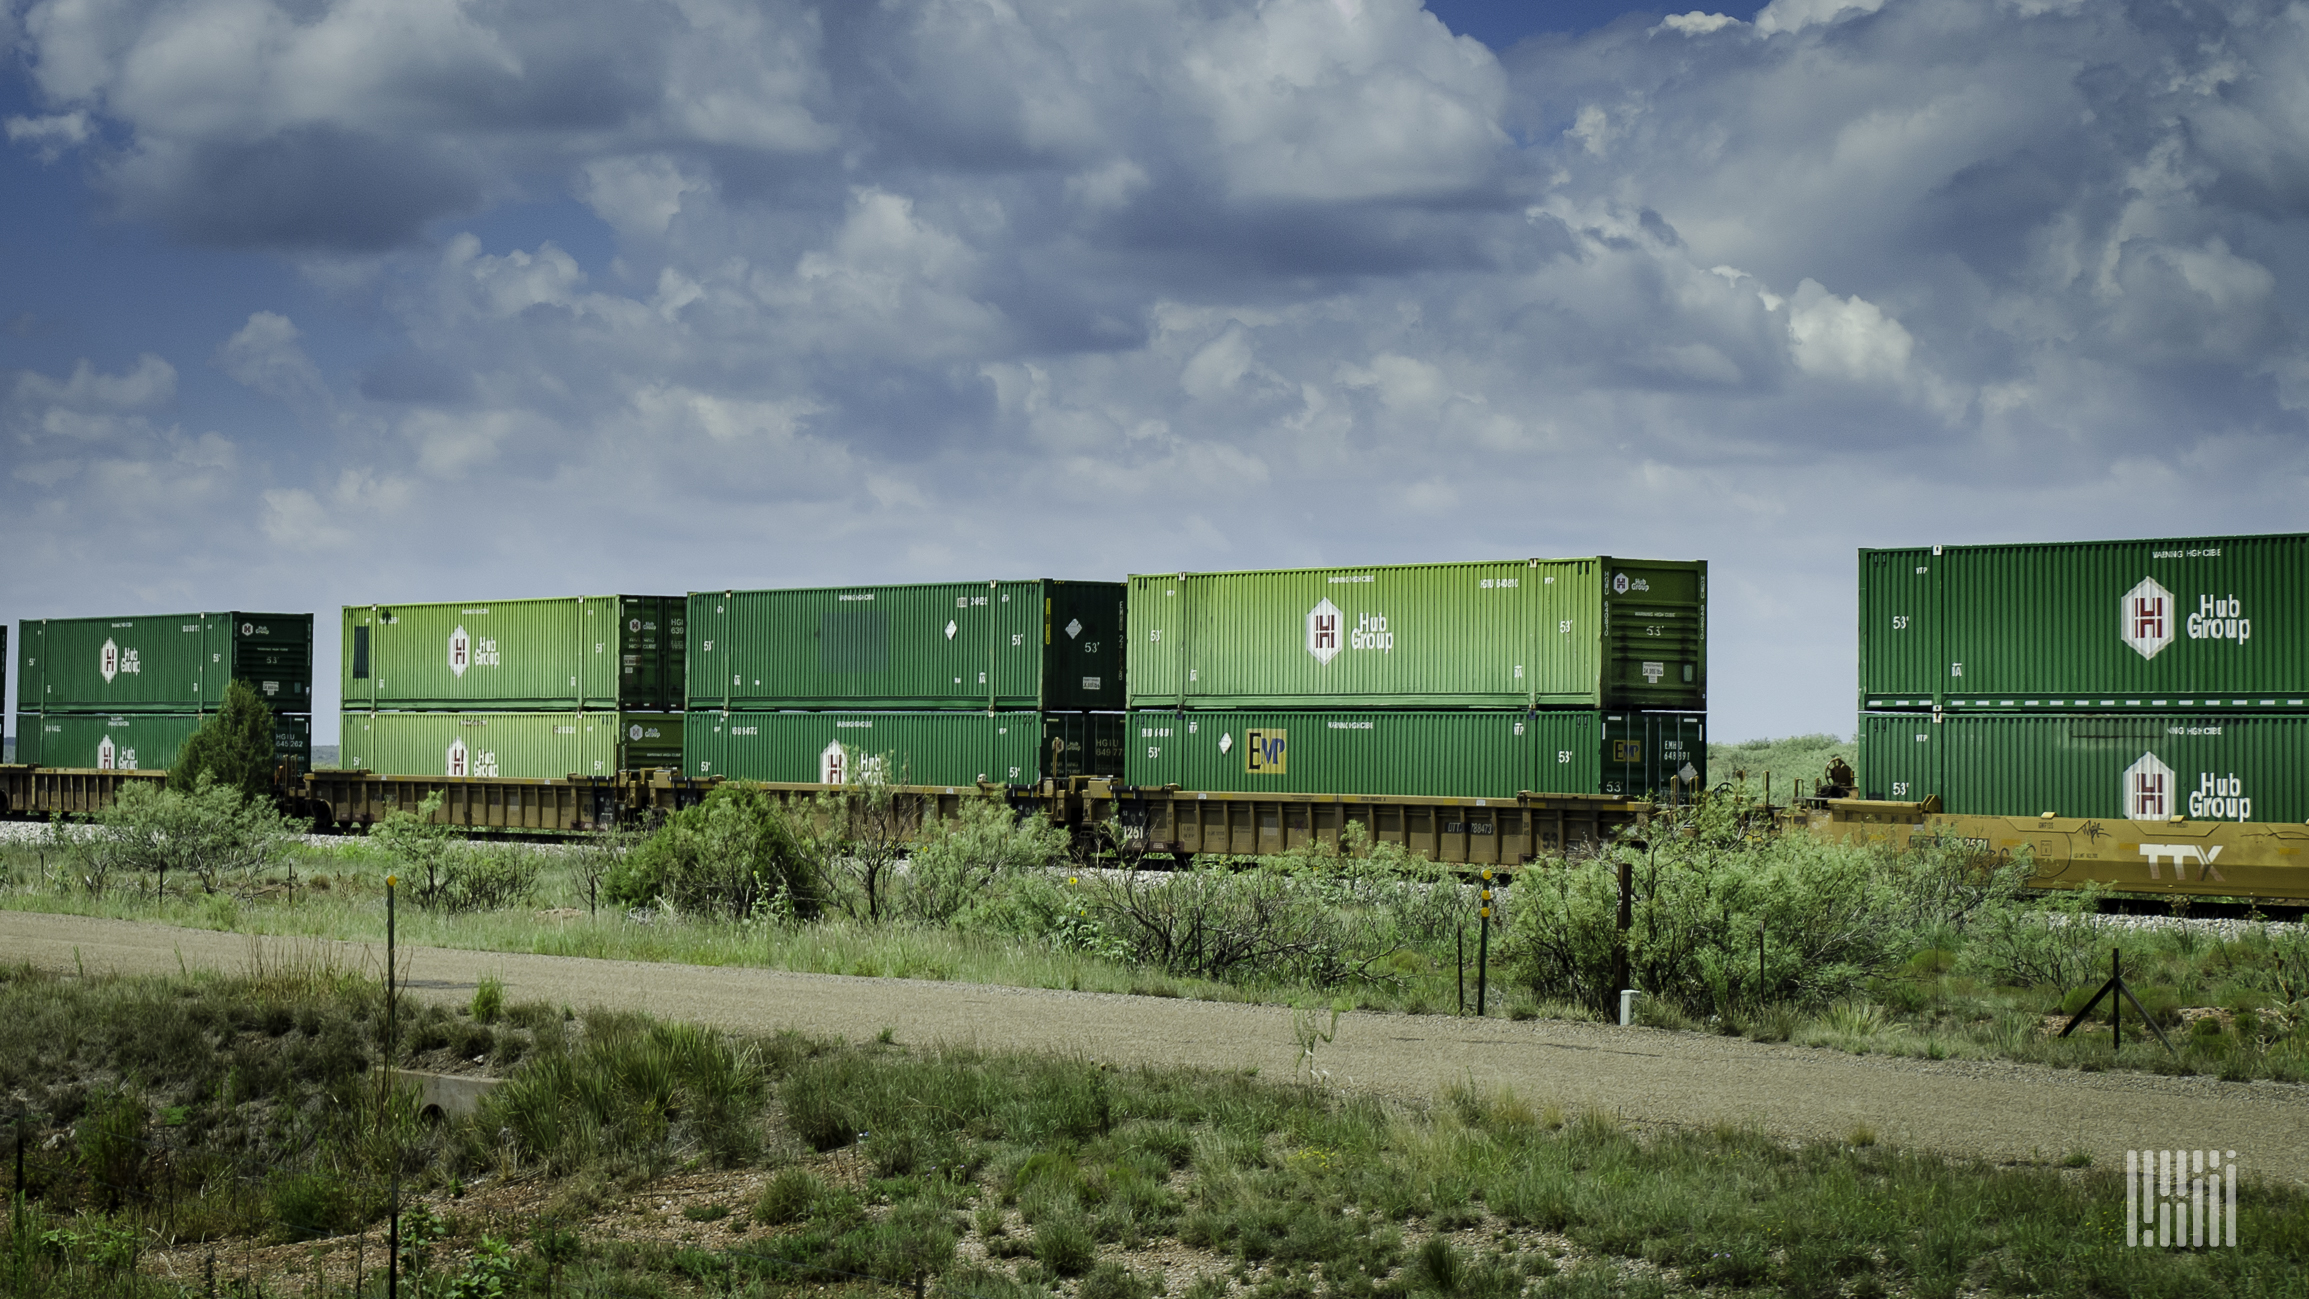 Double-stacked containers sit on a train that is passing through a grassy field.